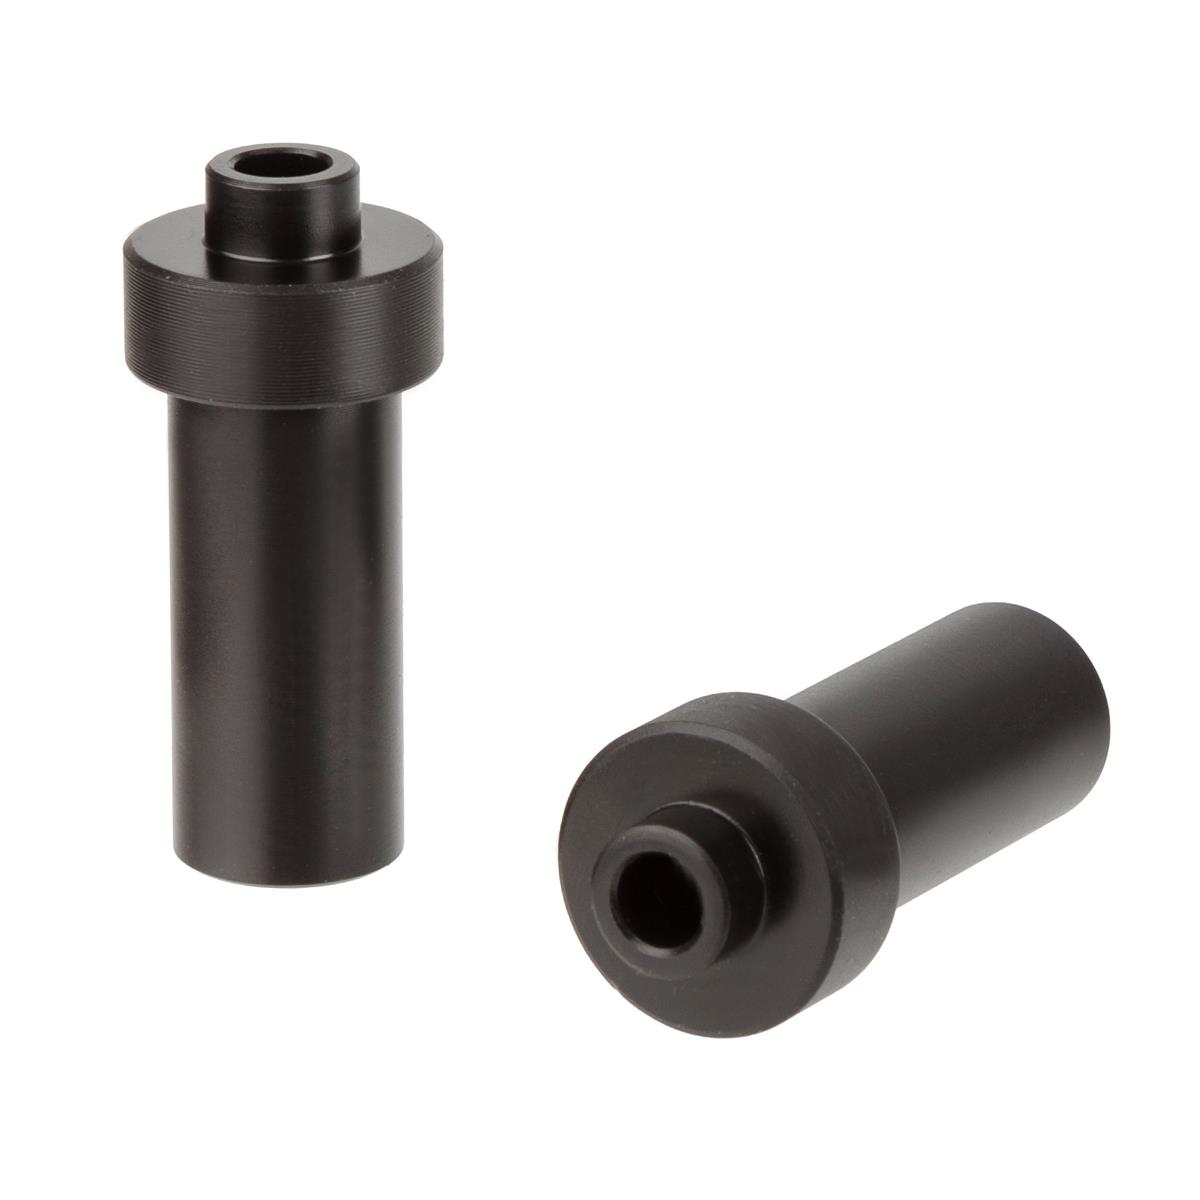 Unior Adapter  For 15 mm Quick Release Axle